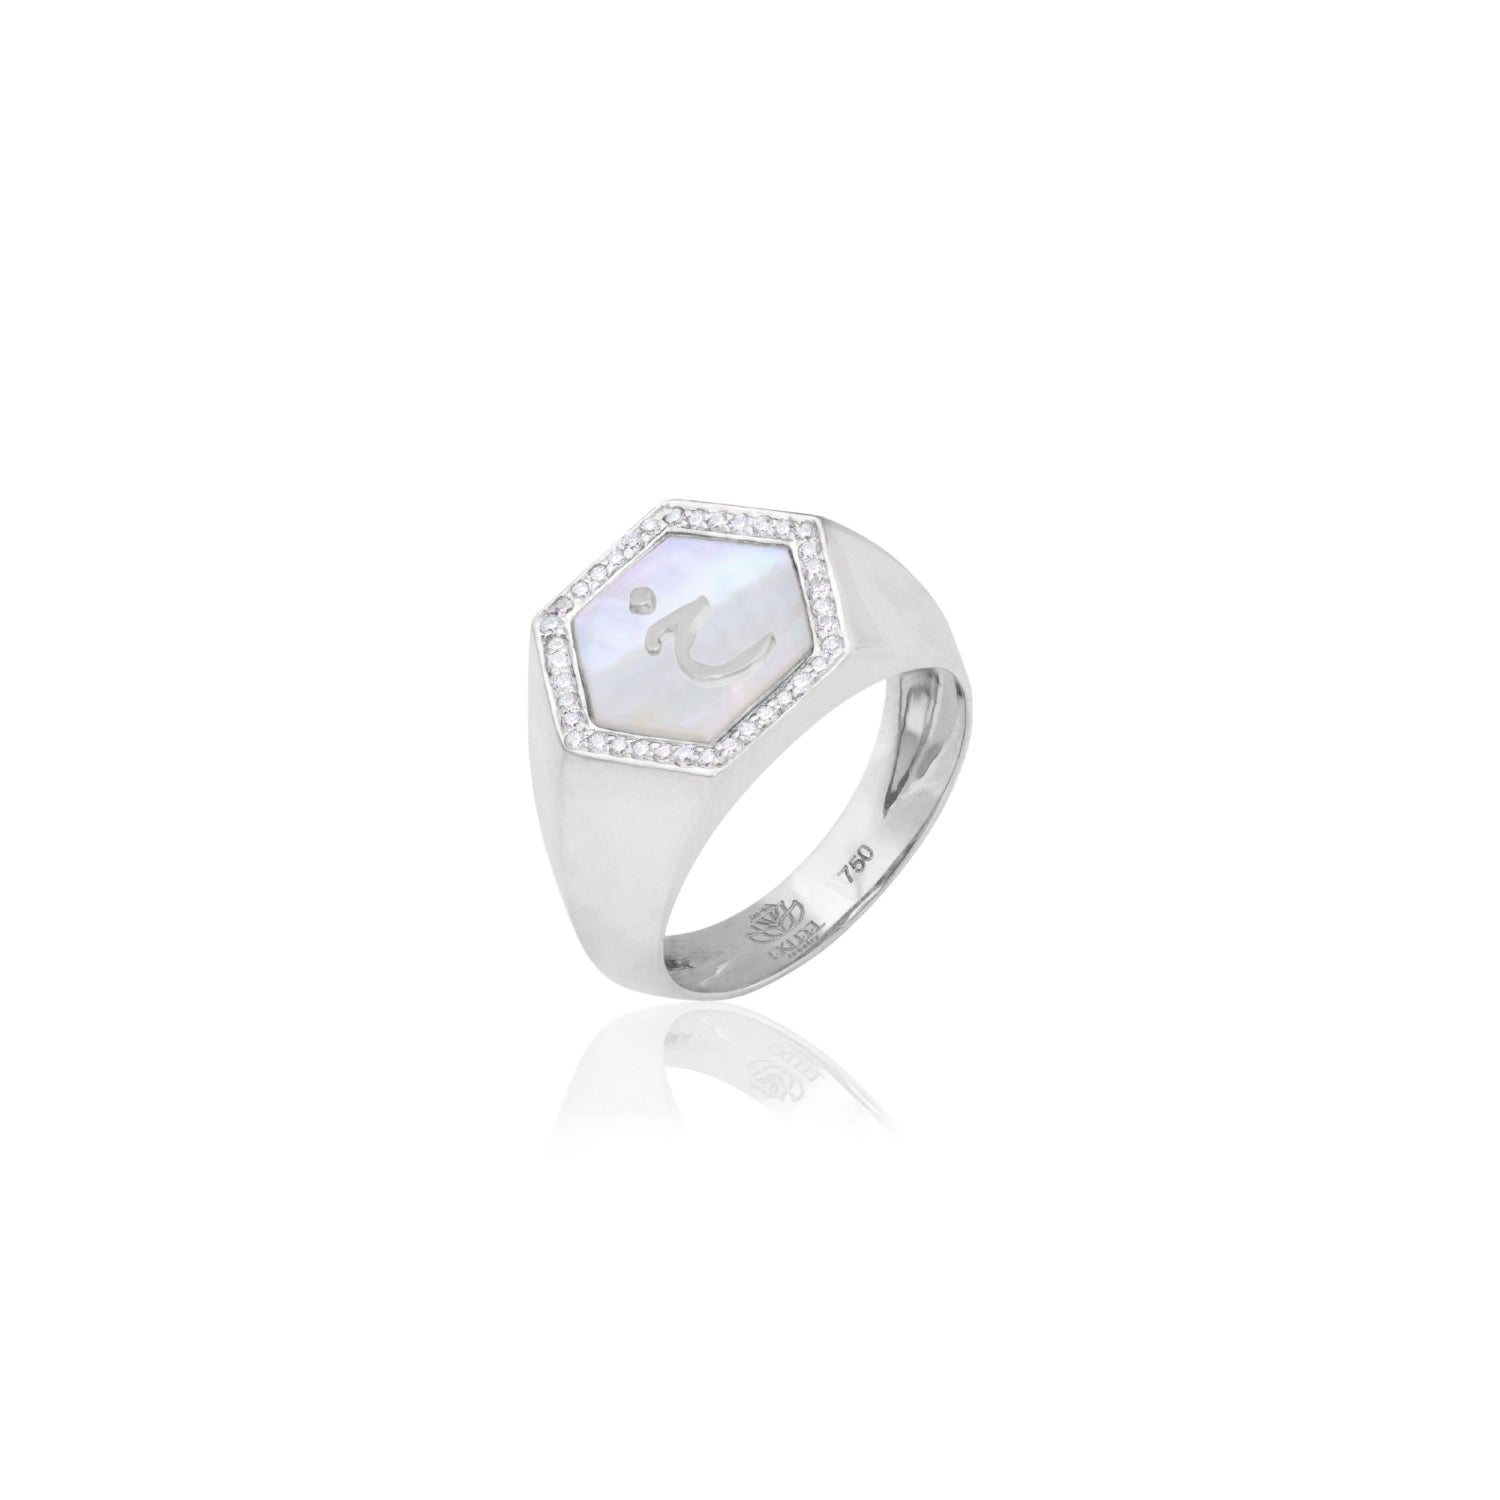 Qamoos 2.0 Letter خ White Mother of Pearl and Diamond Signet Ring in White Gold